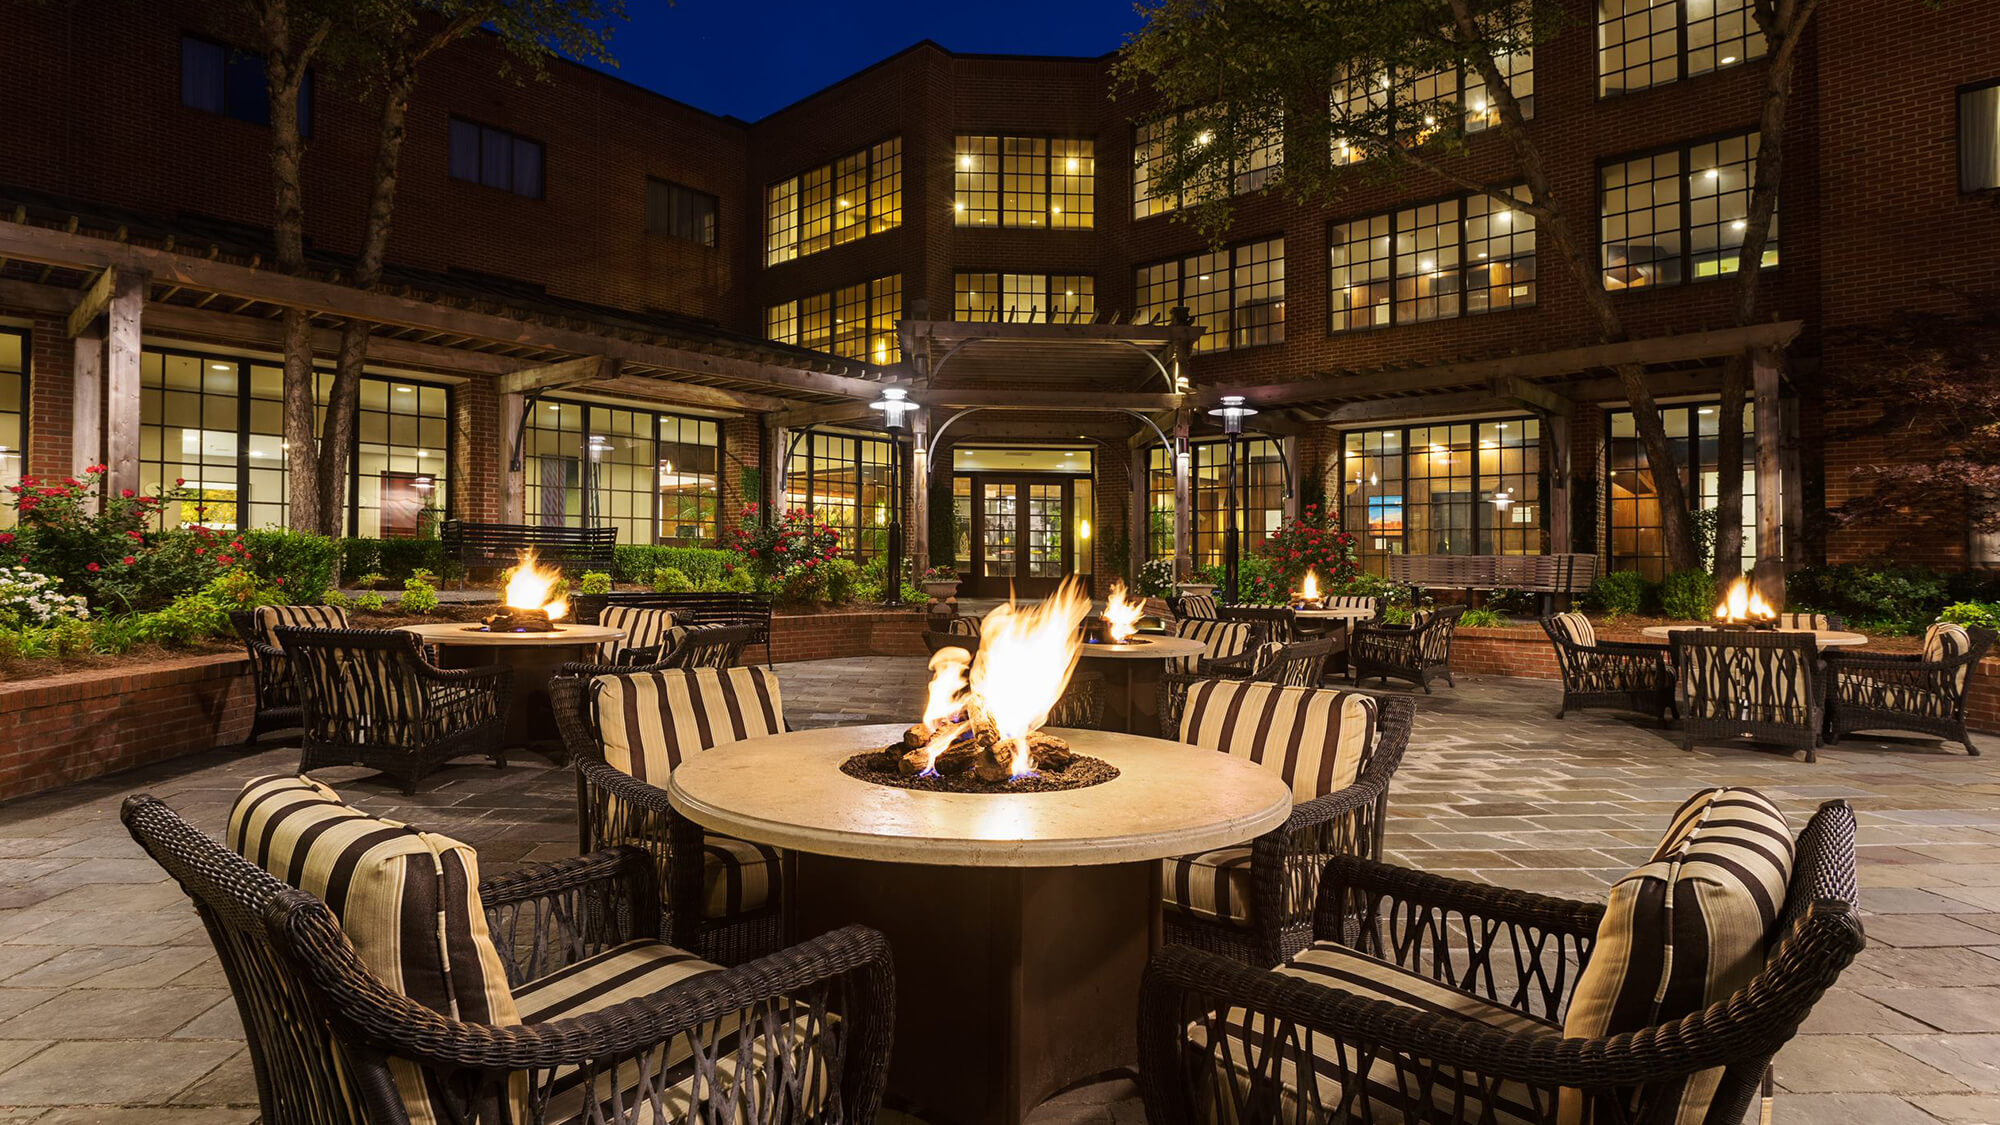 Night view of outdoor patio with firepit tables and lounge chairs in Charlotte, NC